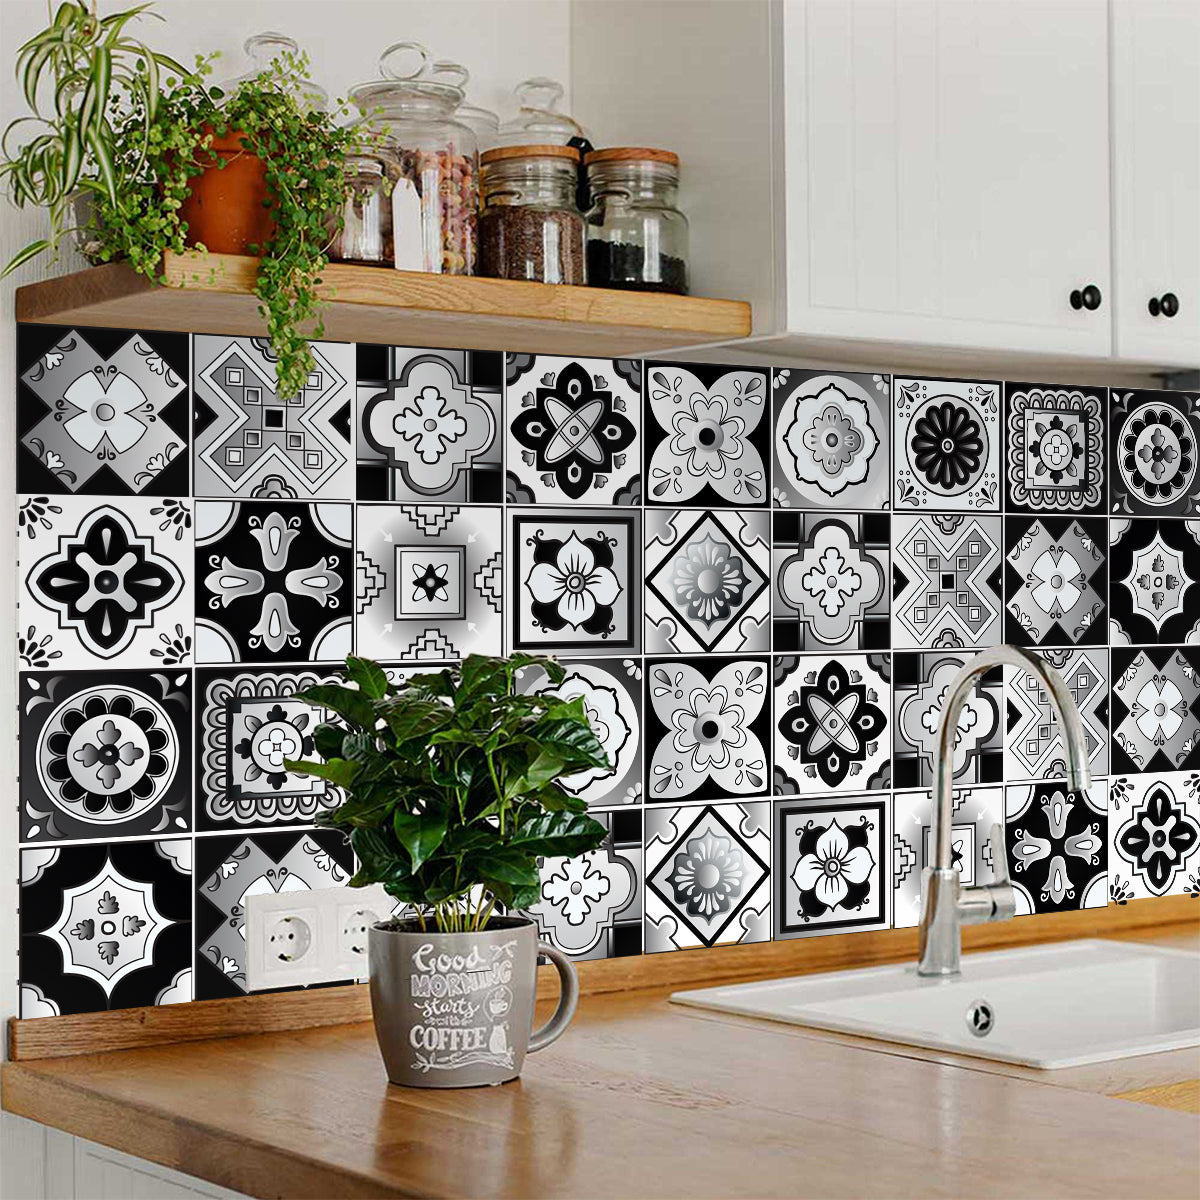 4" X 4" Black White And Gray Mosaic Peel And Stick Removable Tiles